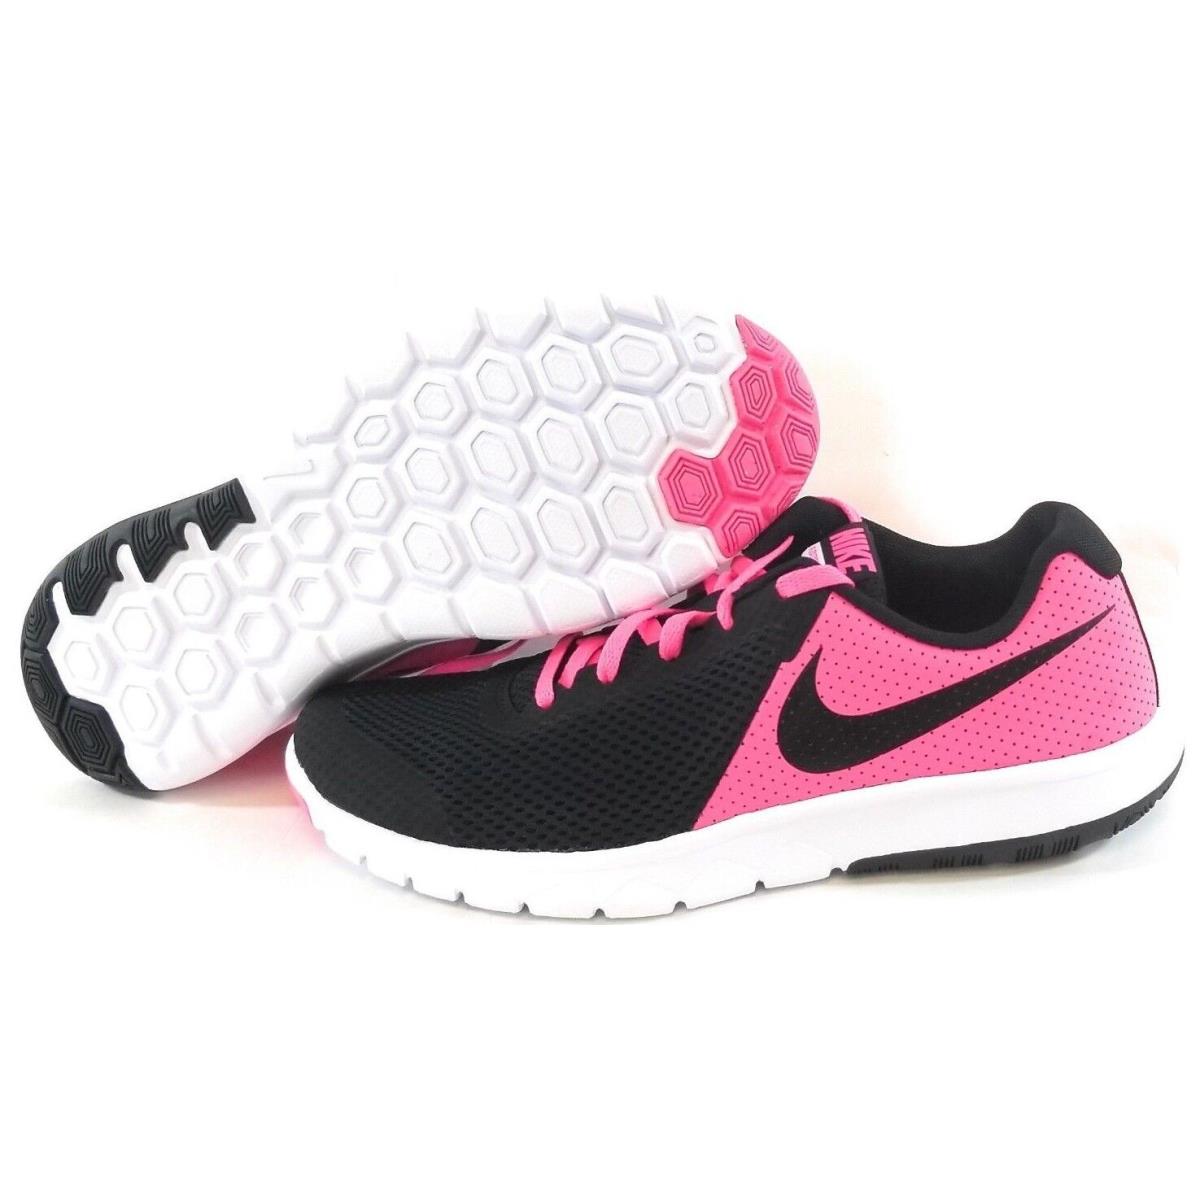 Girls Kids Youth Nike Flex Experience 5 844991 600 Pink Sneakers Shoes - PInk